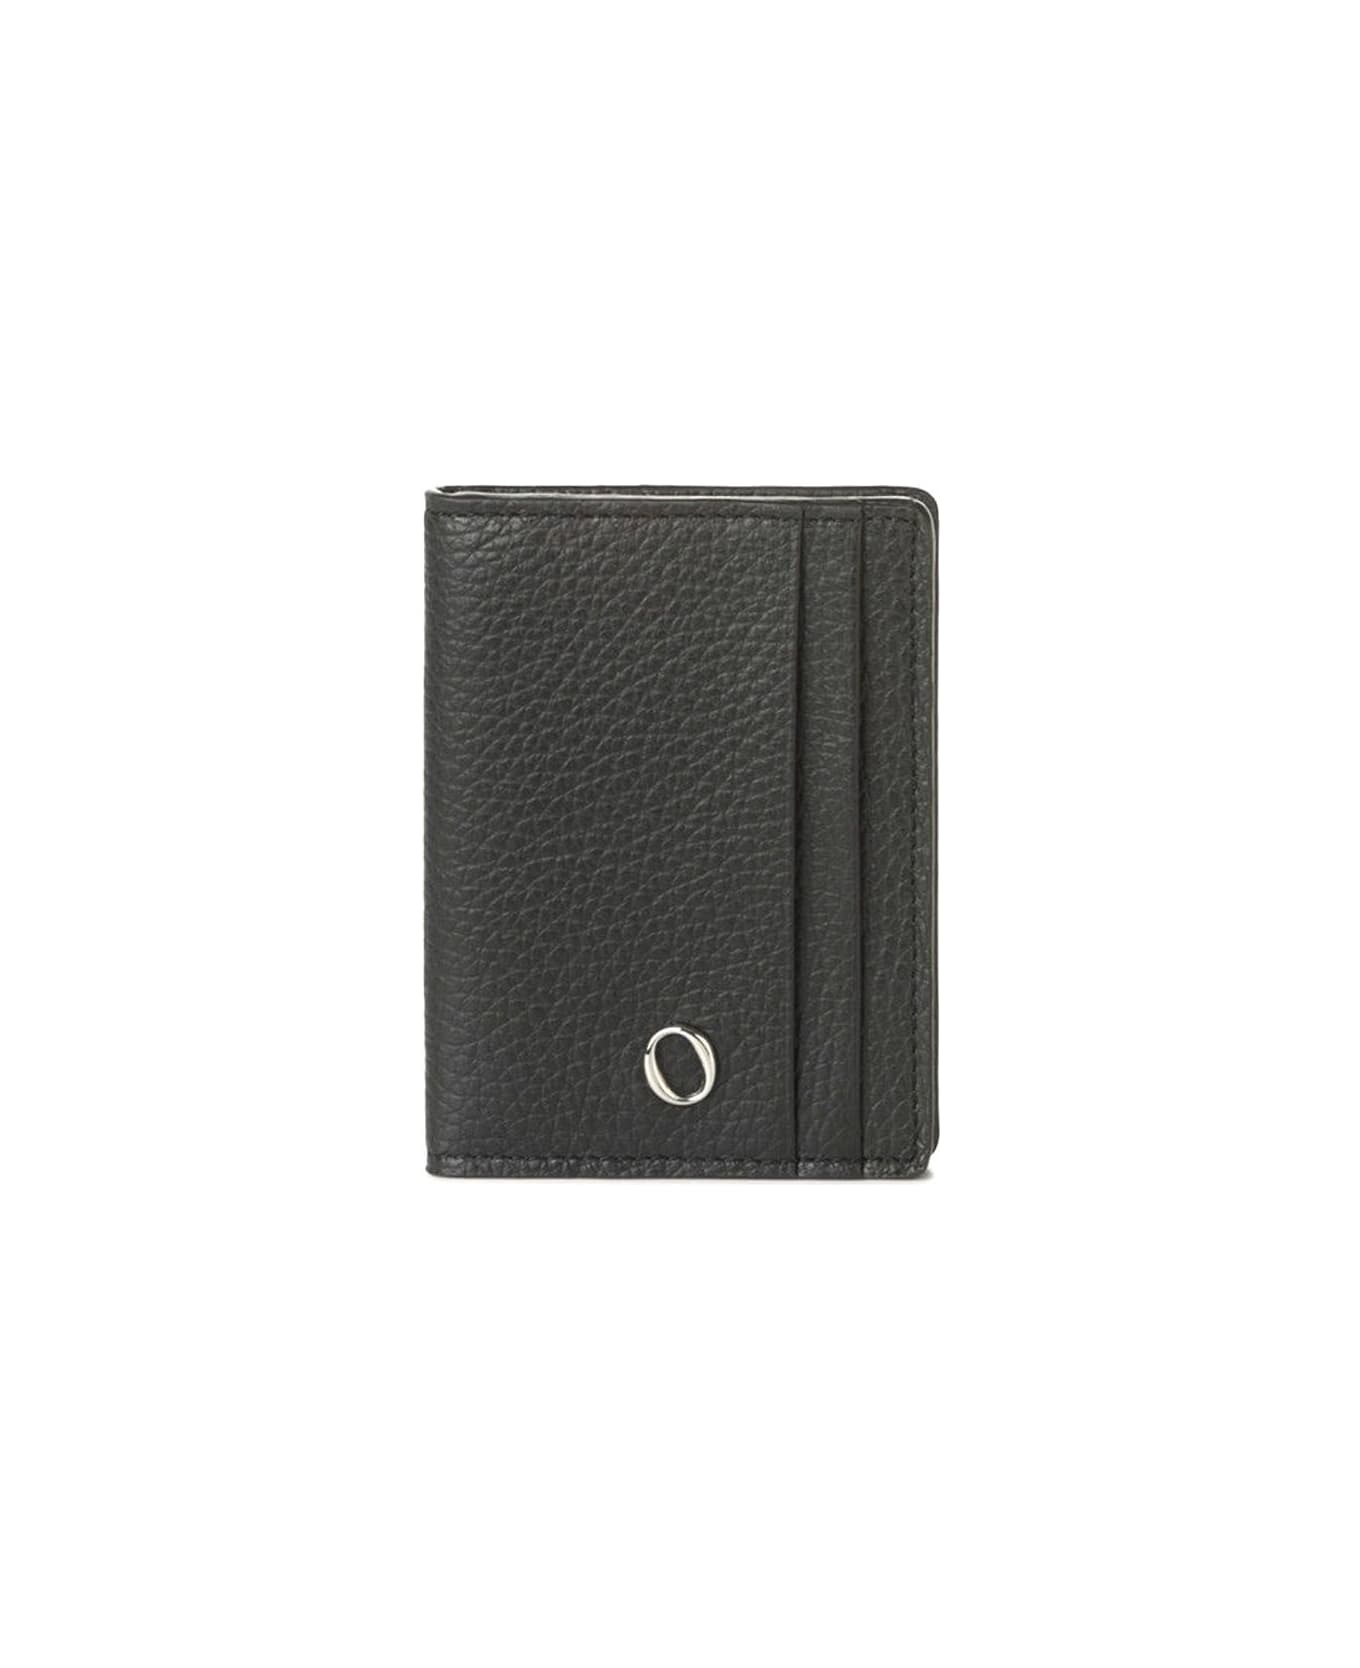 Orciani Micron Hinge Opening Leather Card Holder - Black バッグ